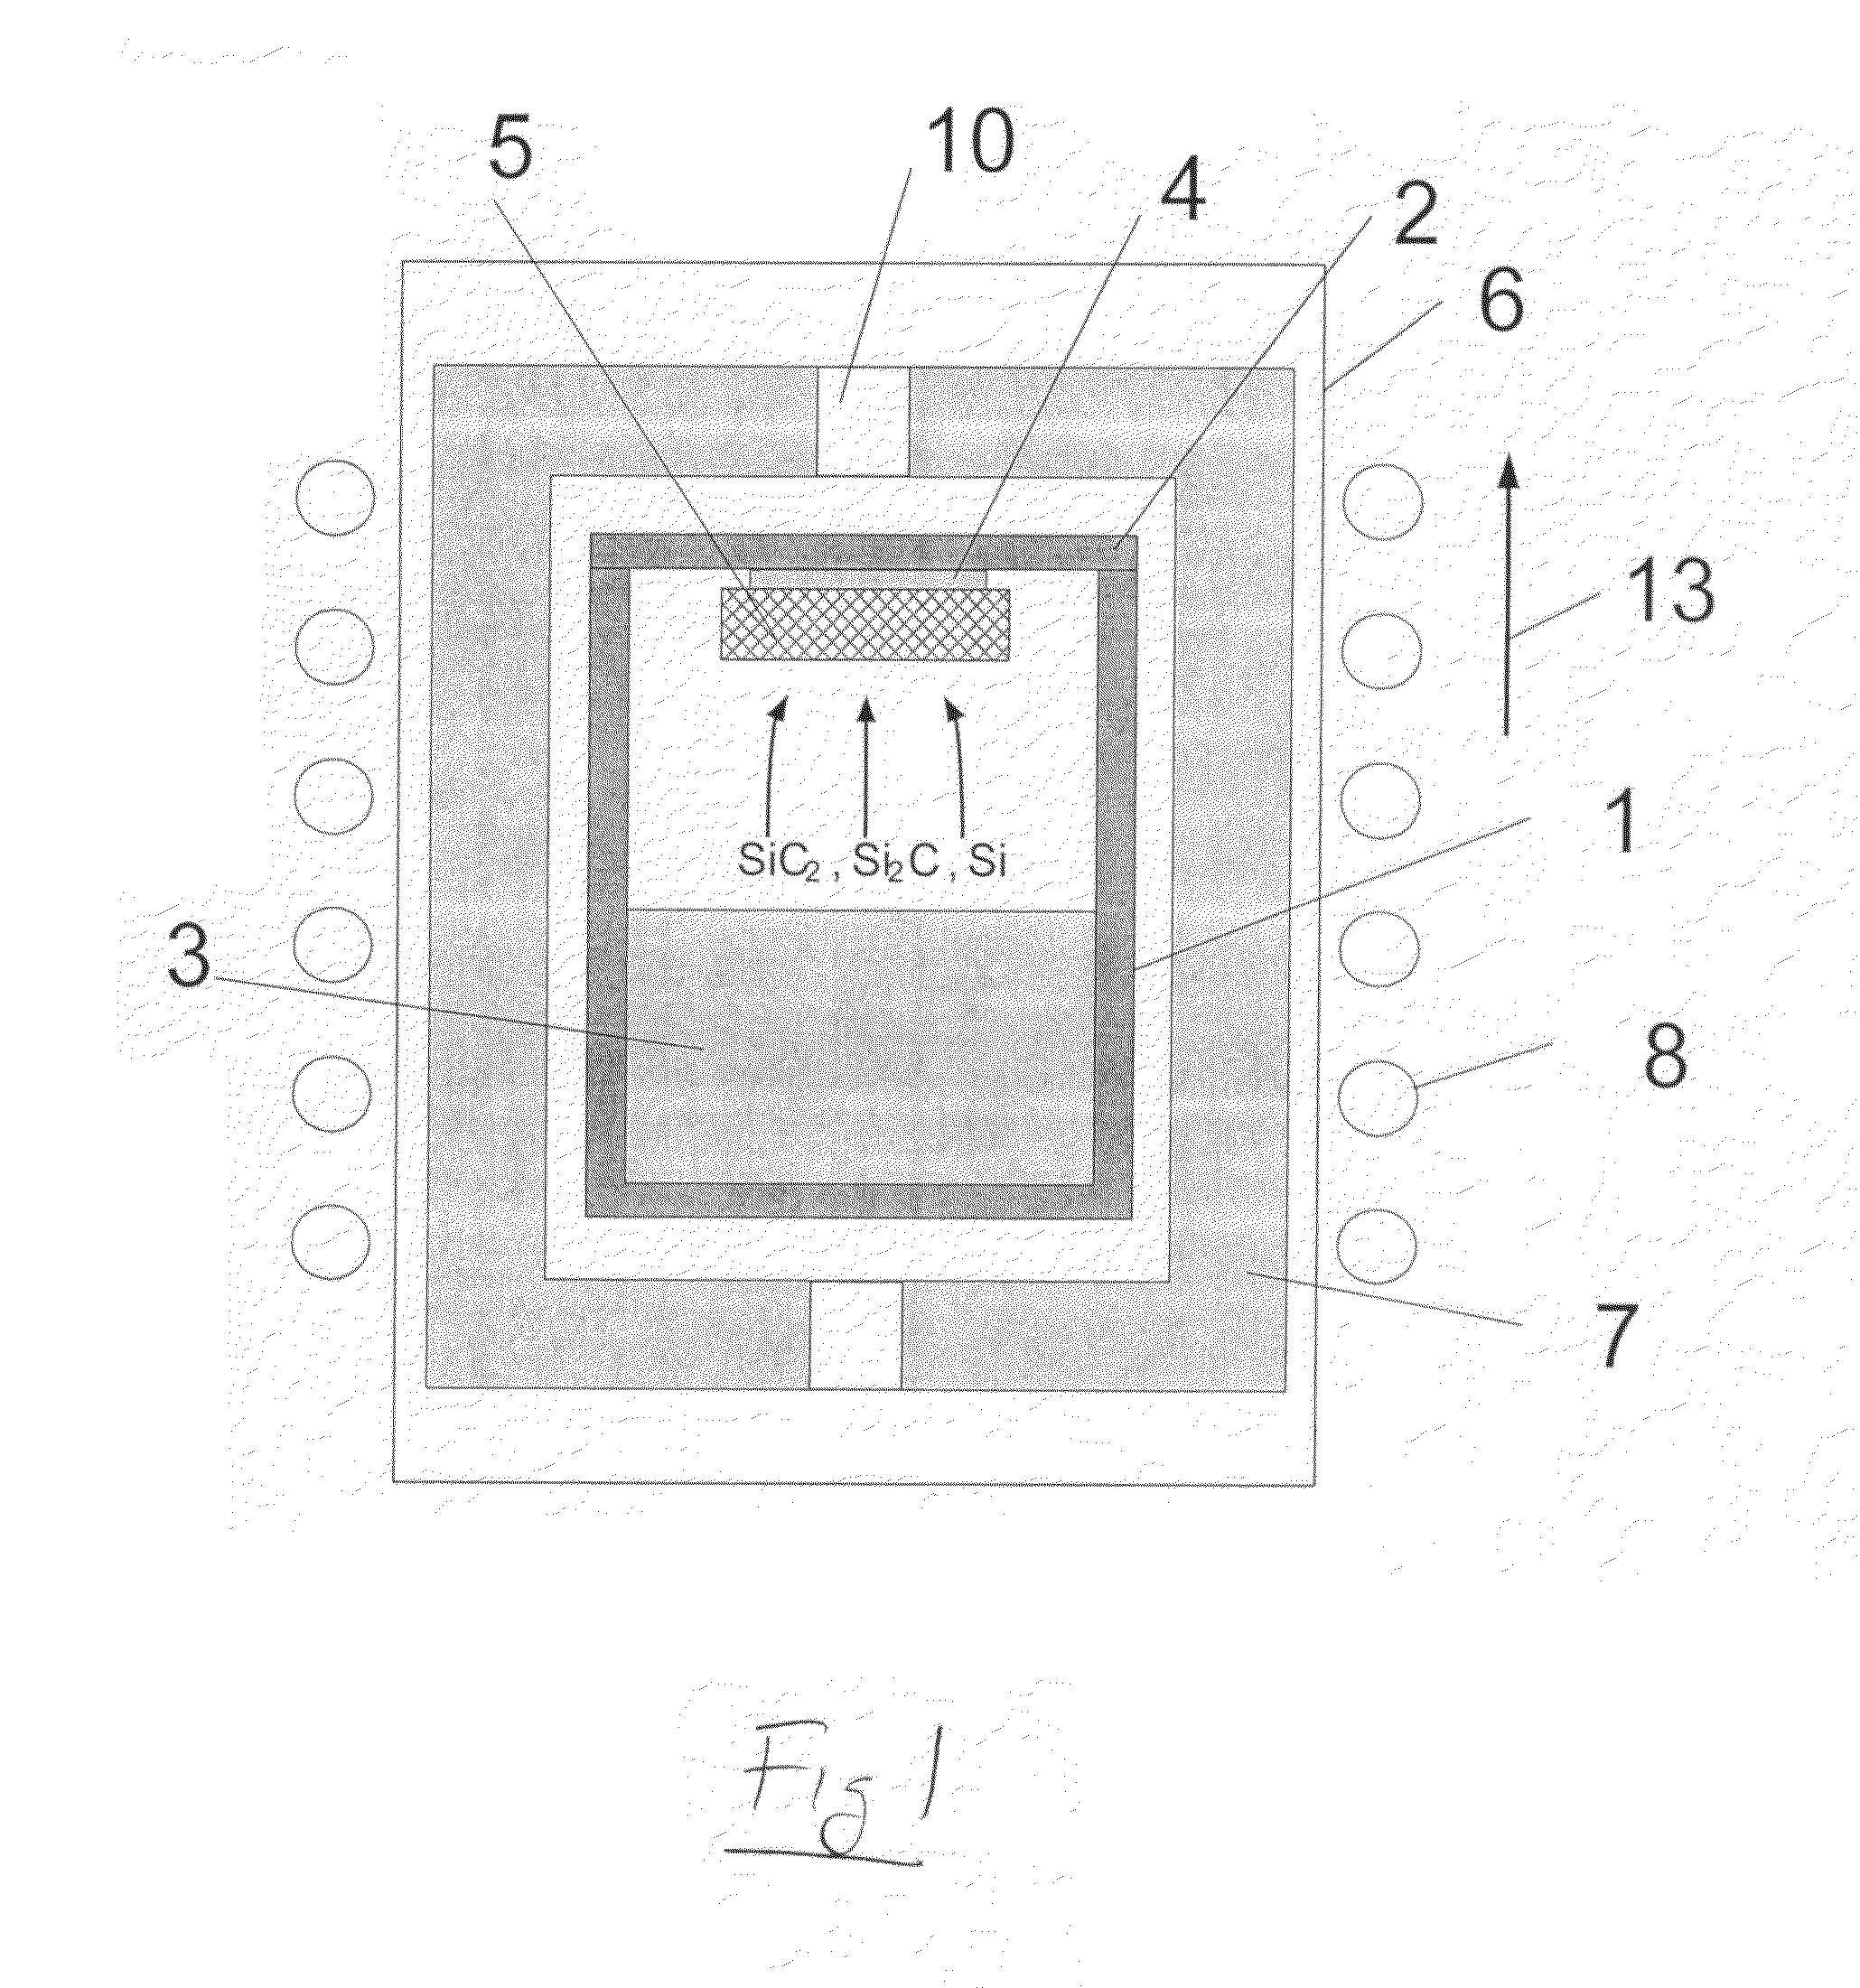 Method of annealing a sublimation grown crystal